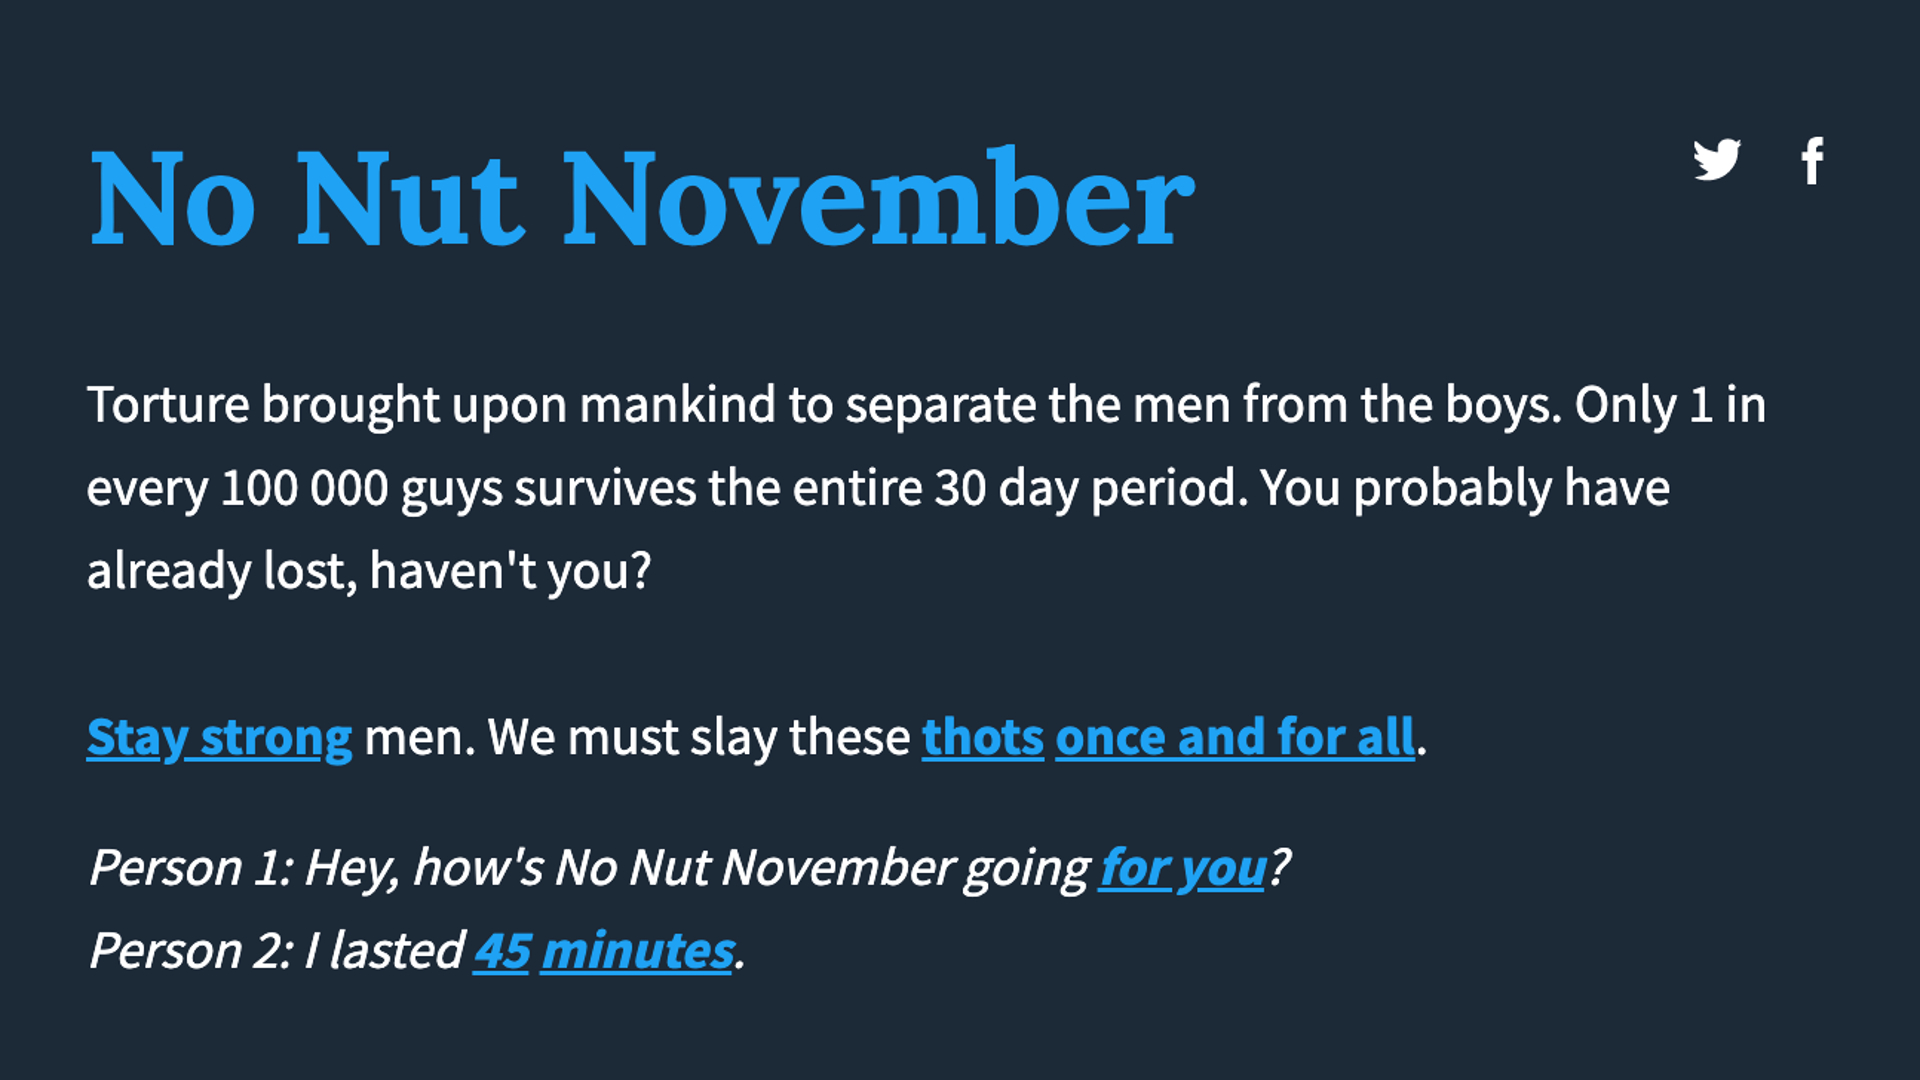 What's the Point of No Nut November?